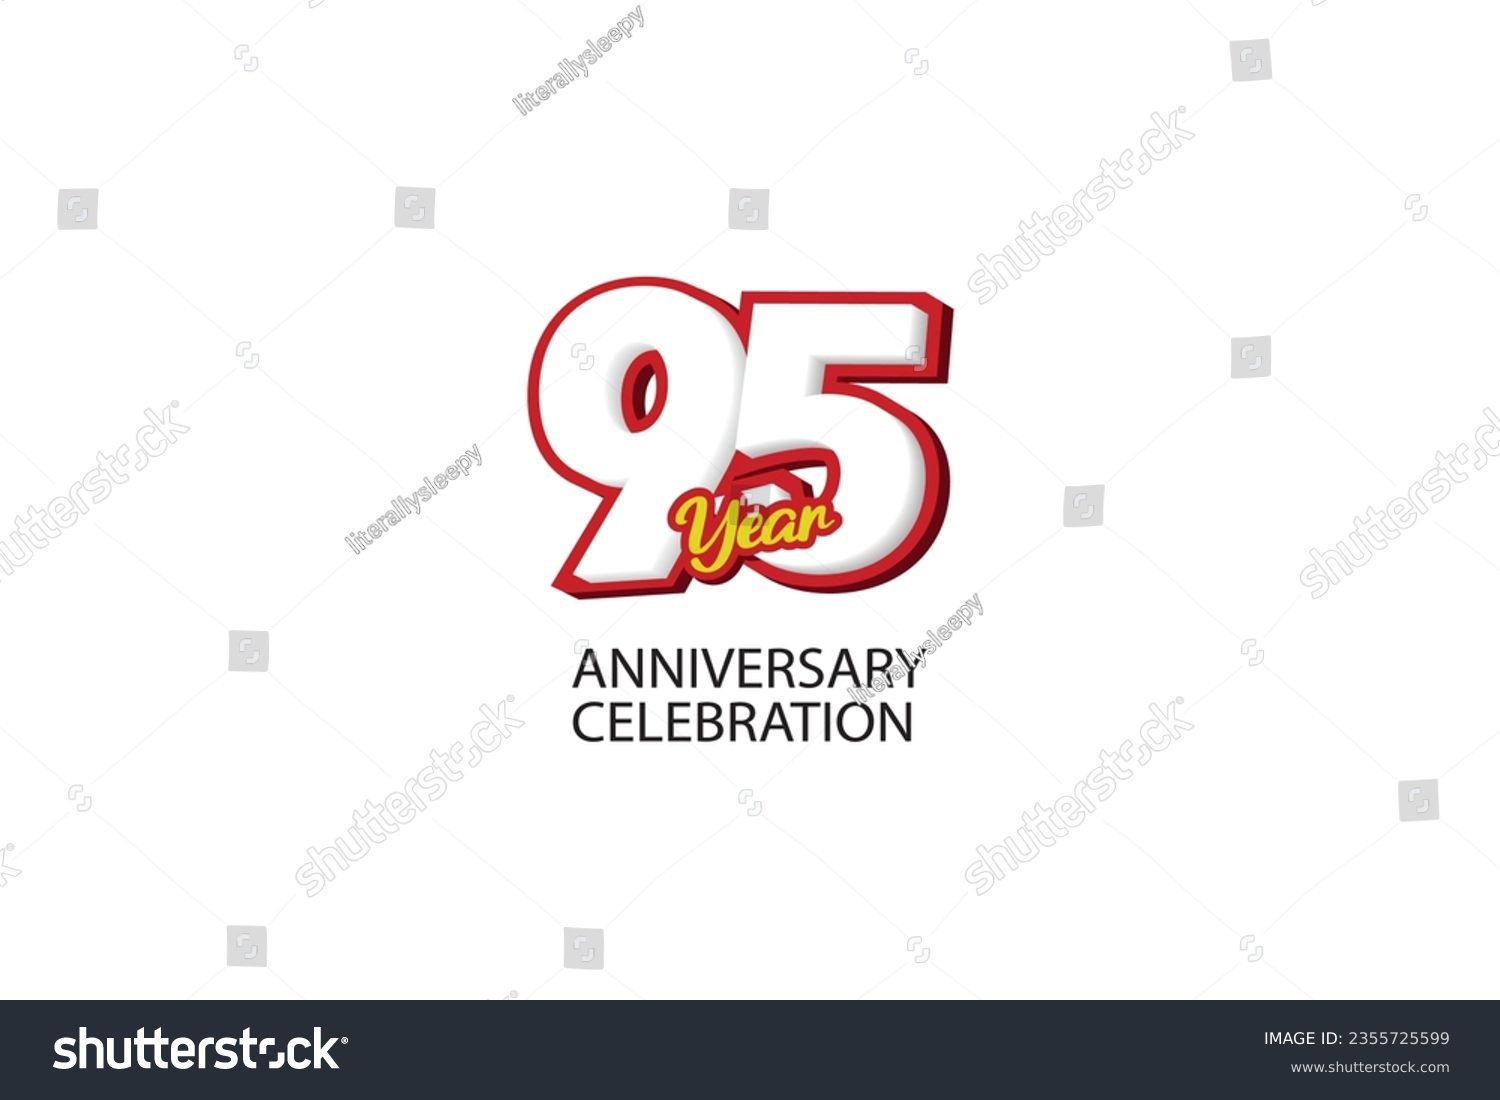 SVG of 95th, 95 years, 95 year anniversary minimalist logo, jubilee, greeting card. Birthday invitation, sign. Red space vector illustration on white background - Vector svg